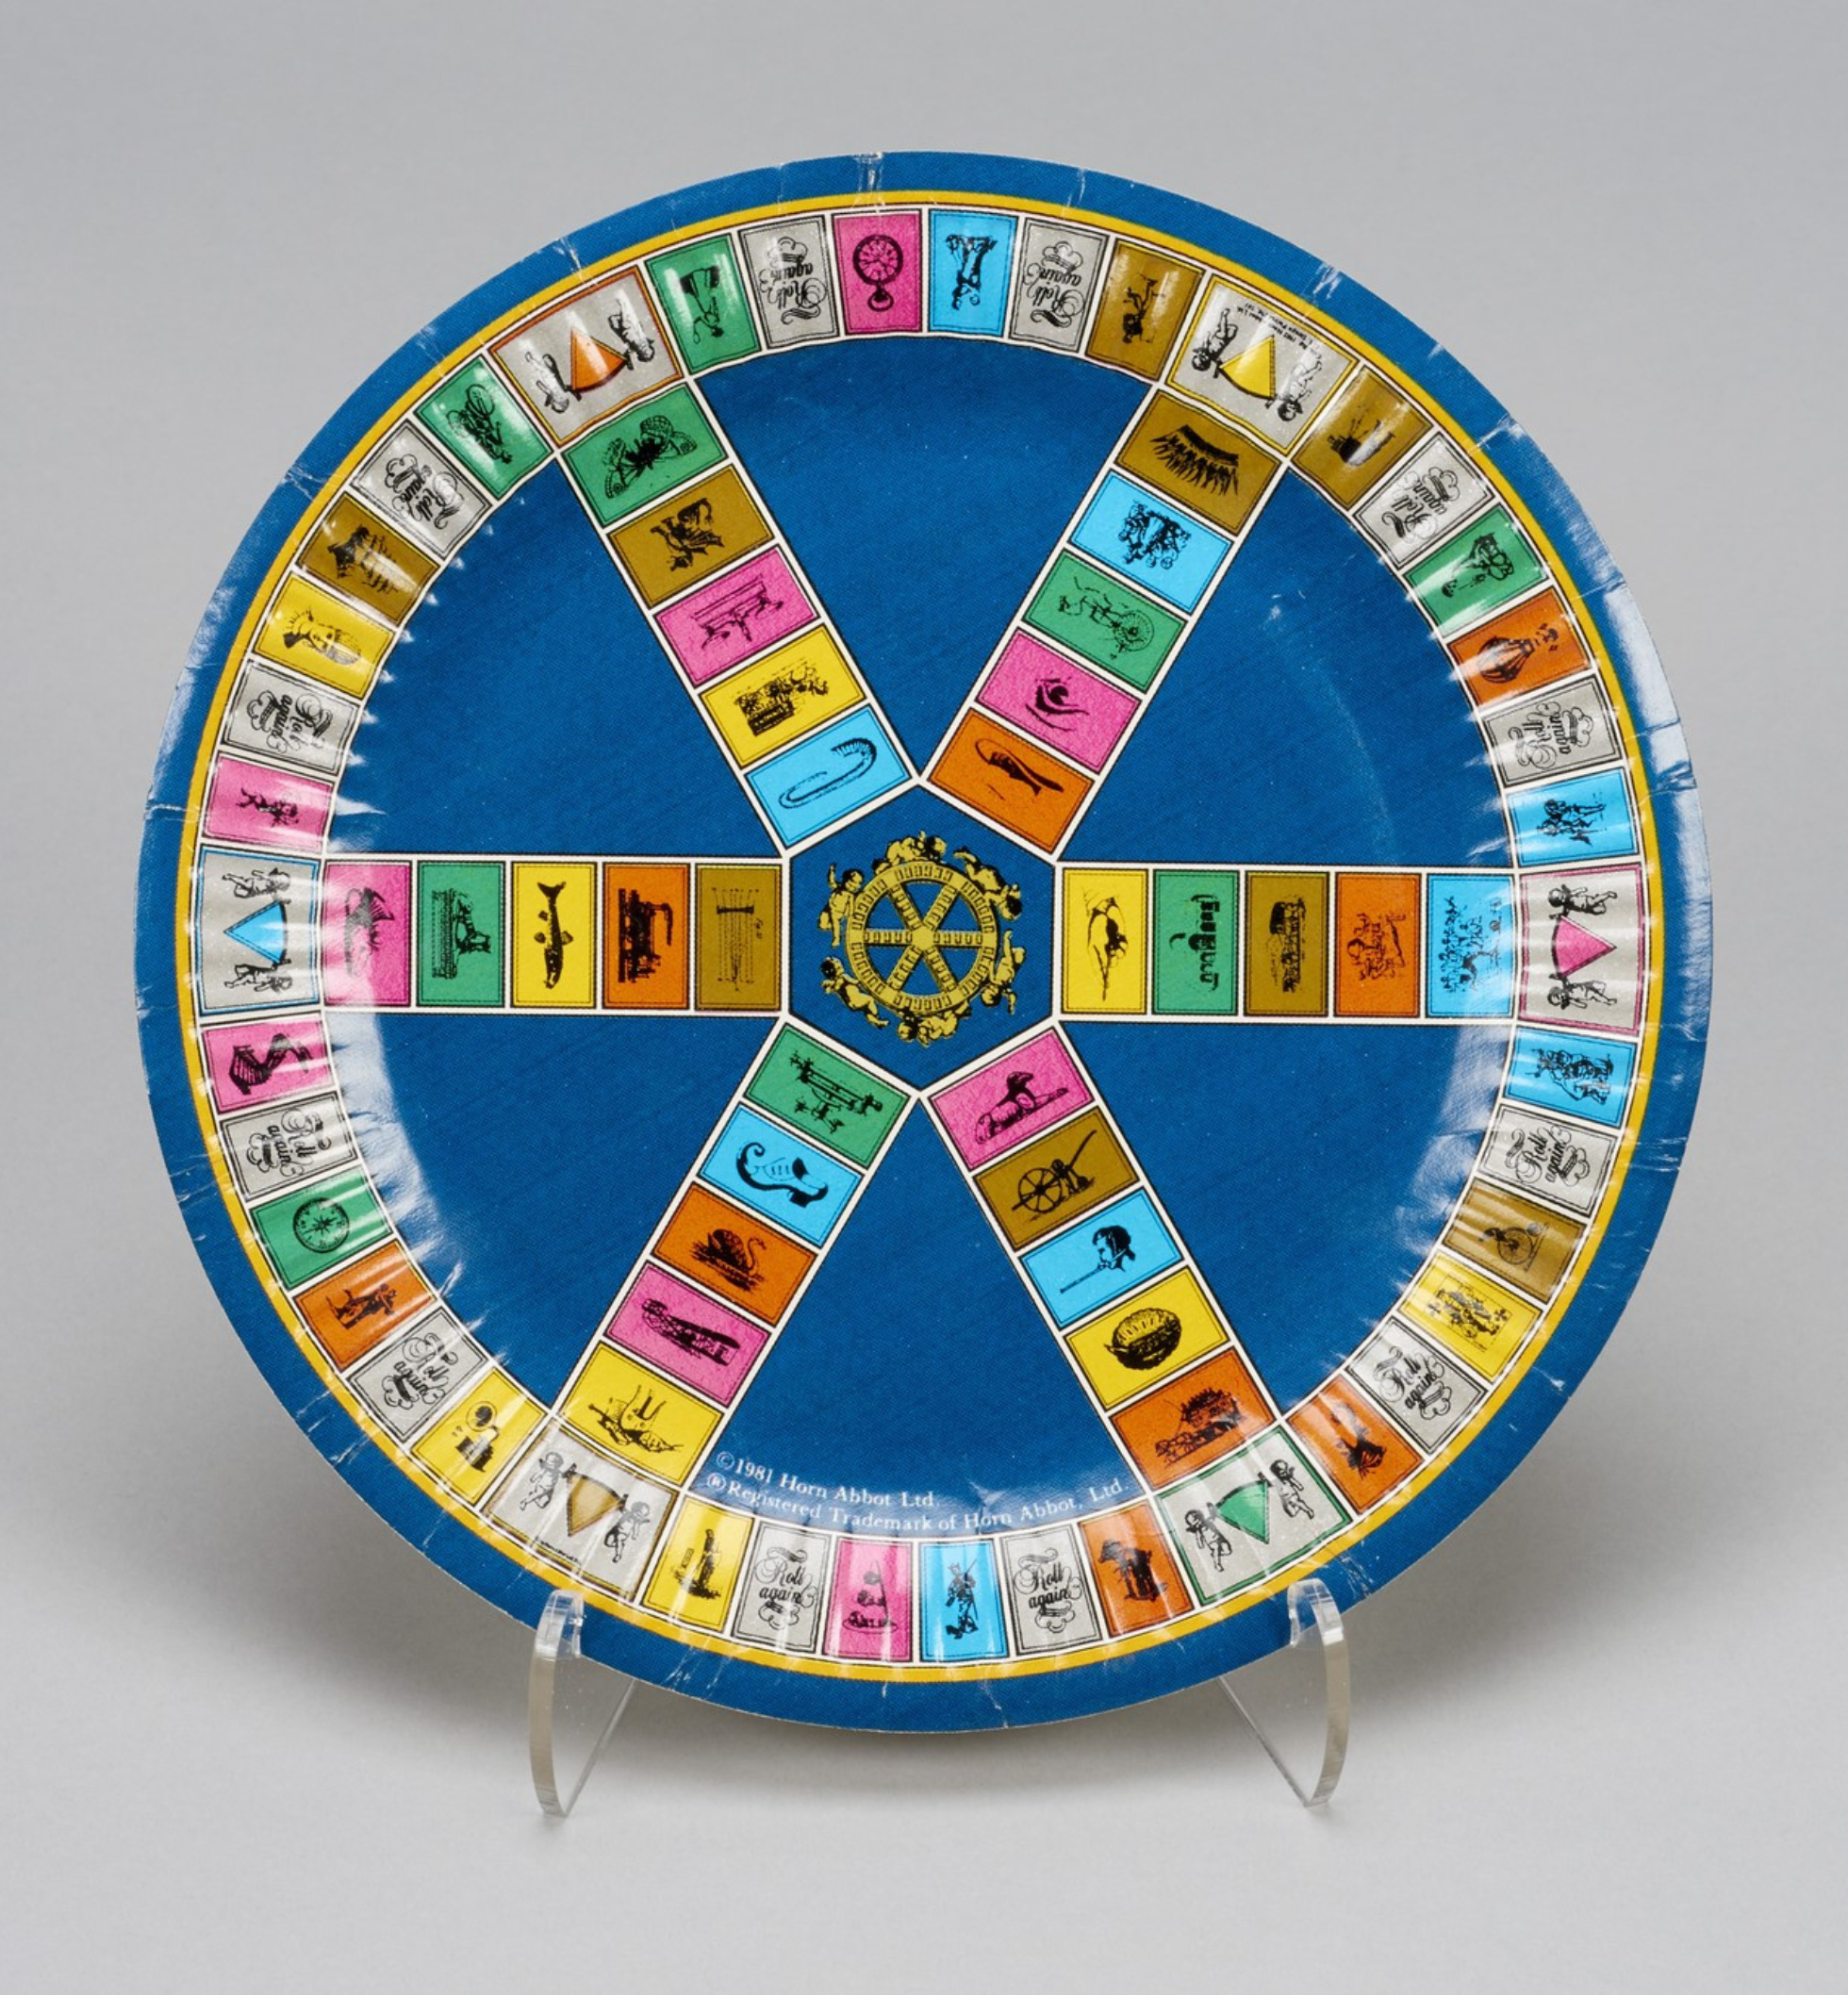 Hasbro Gaming Trivial Pursuit Greatest Hits